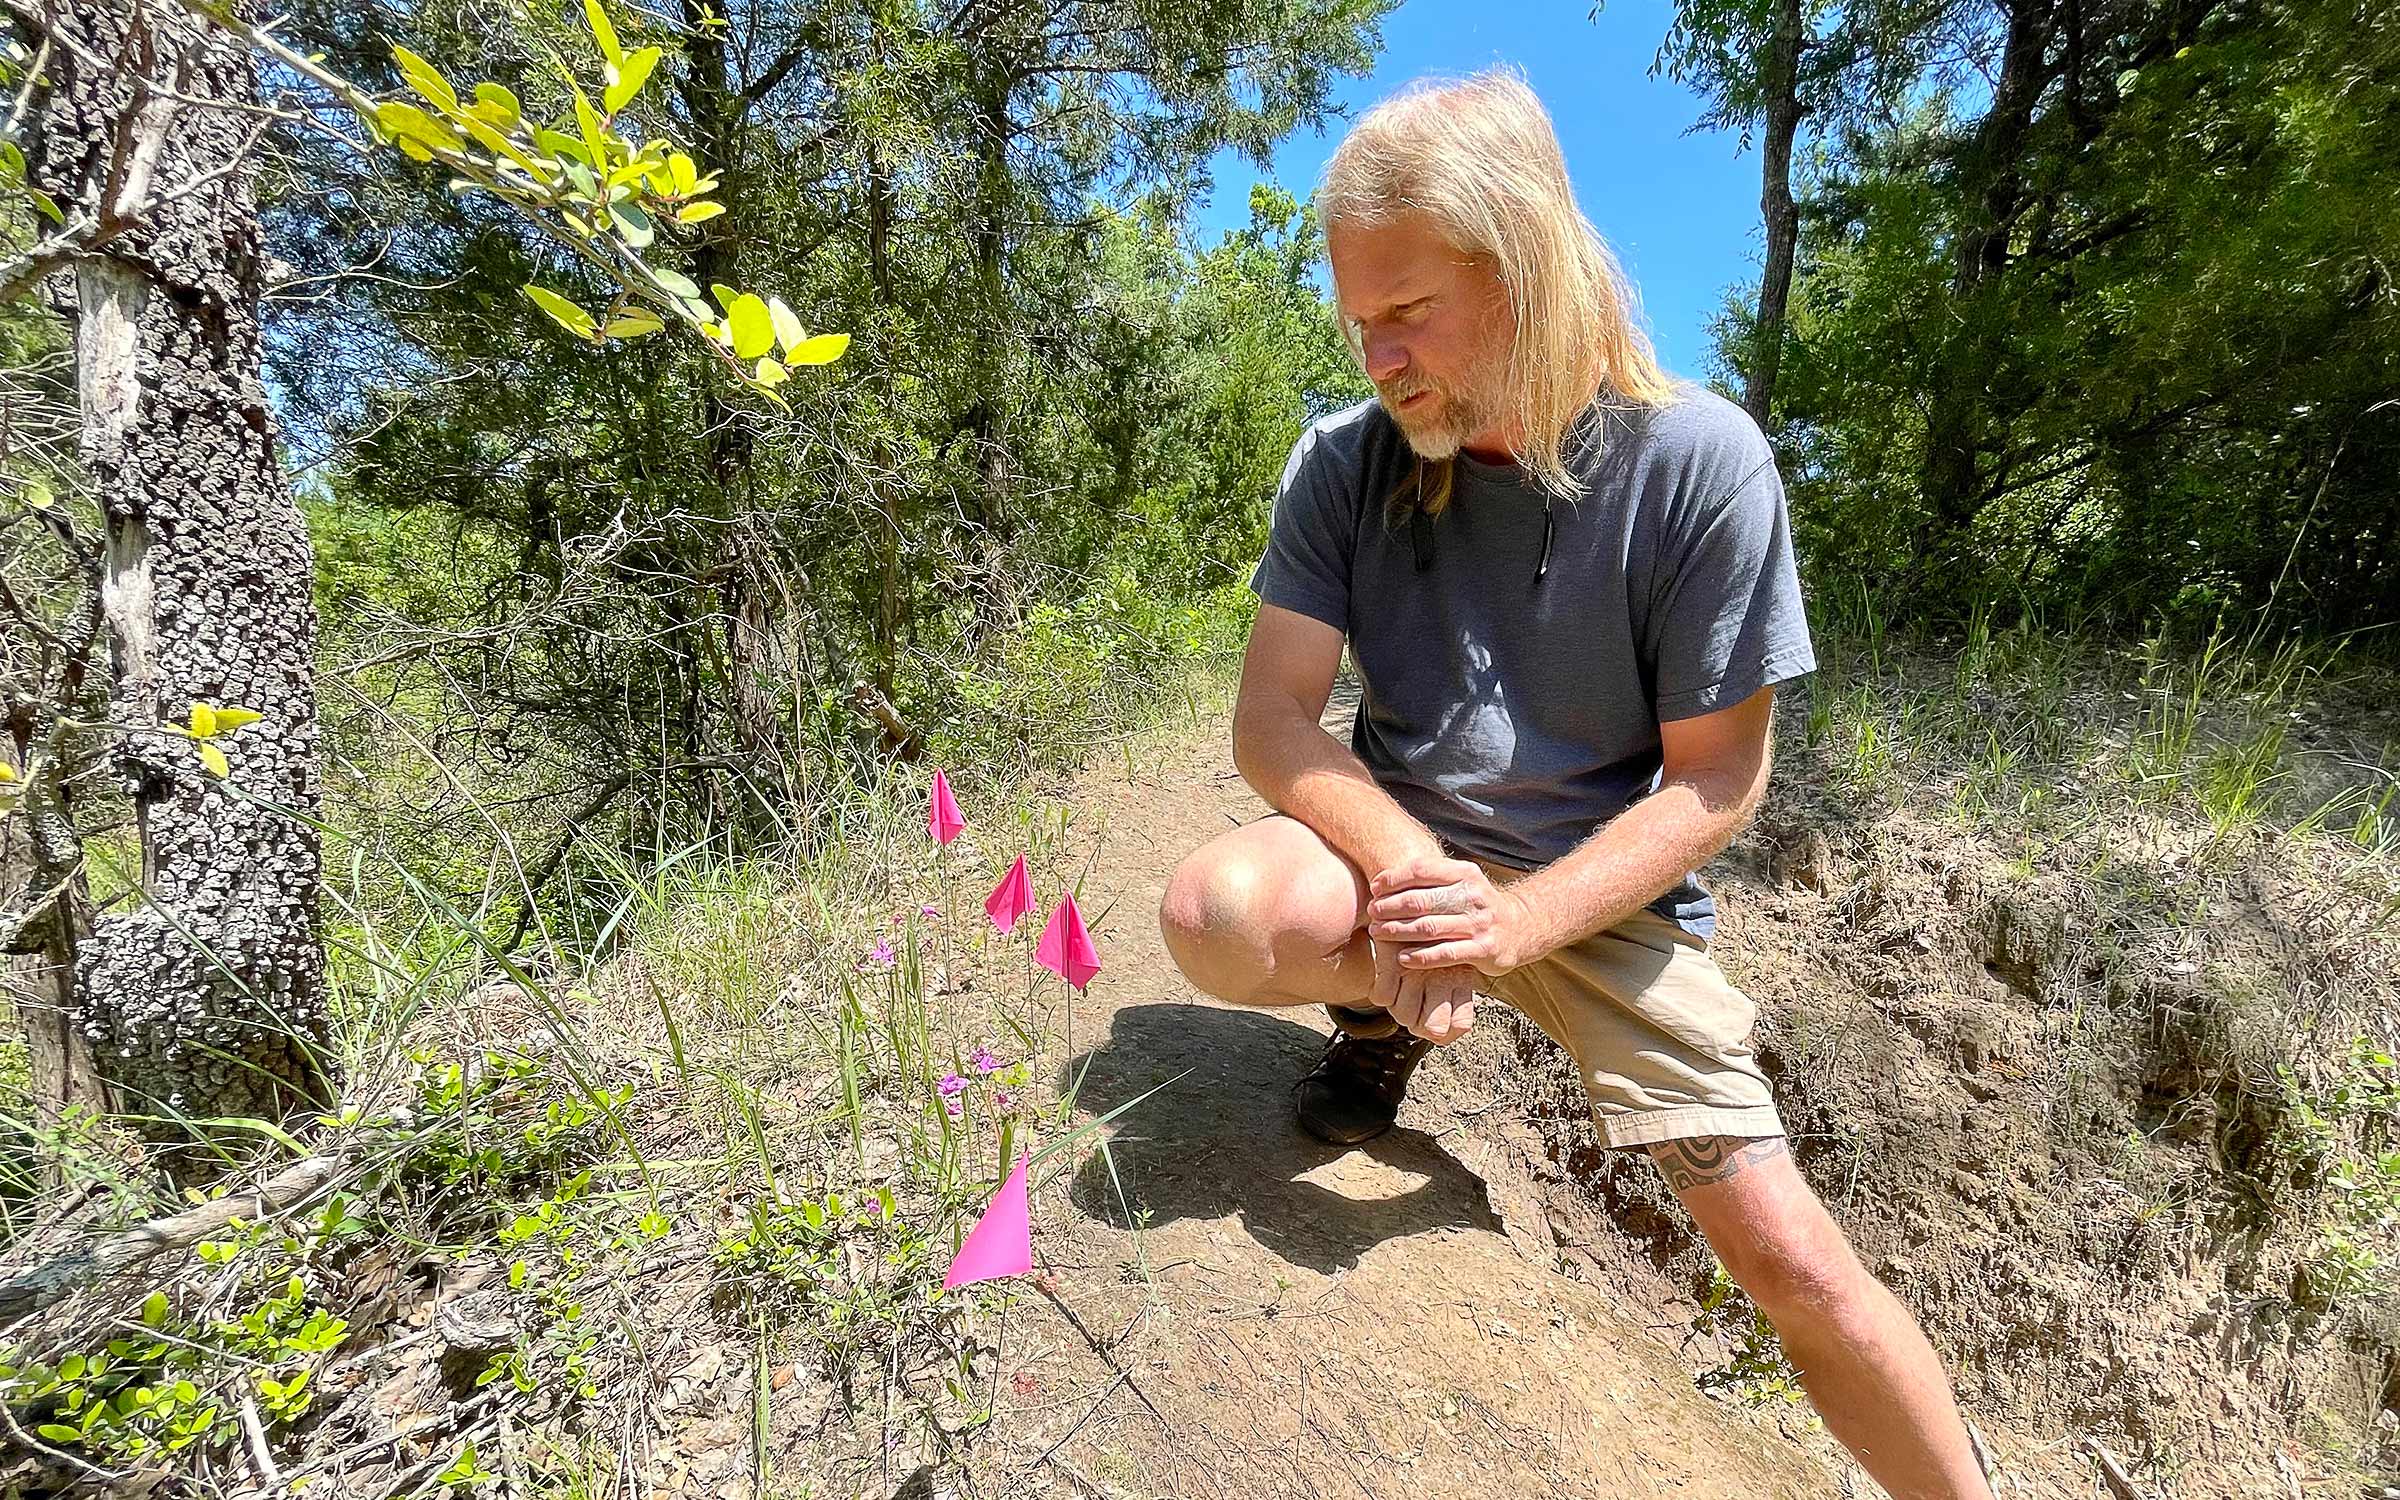 Meet a Texas Plant Hunter Who's Combing Forests and Fields to Save